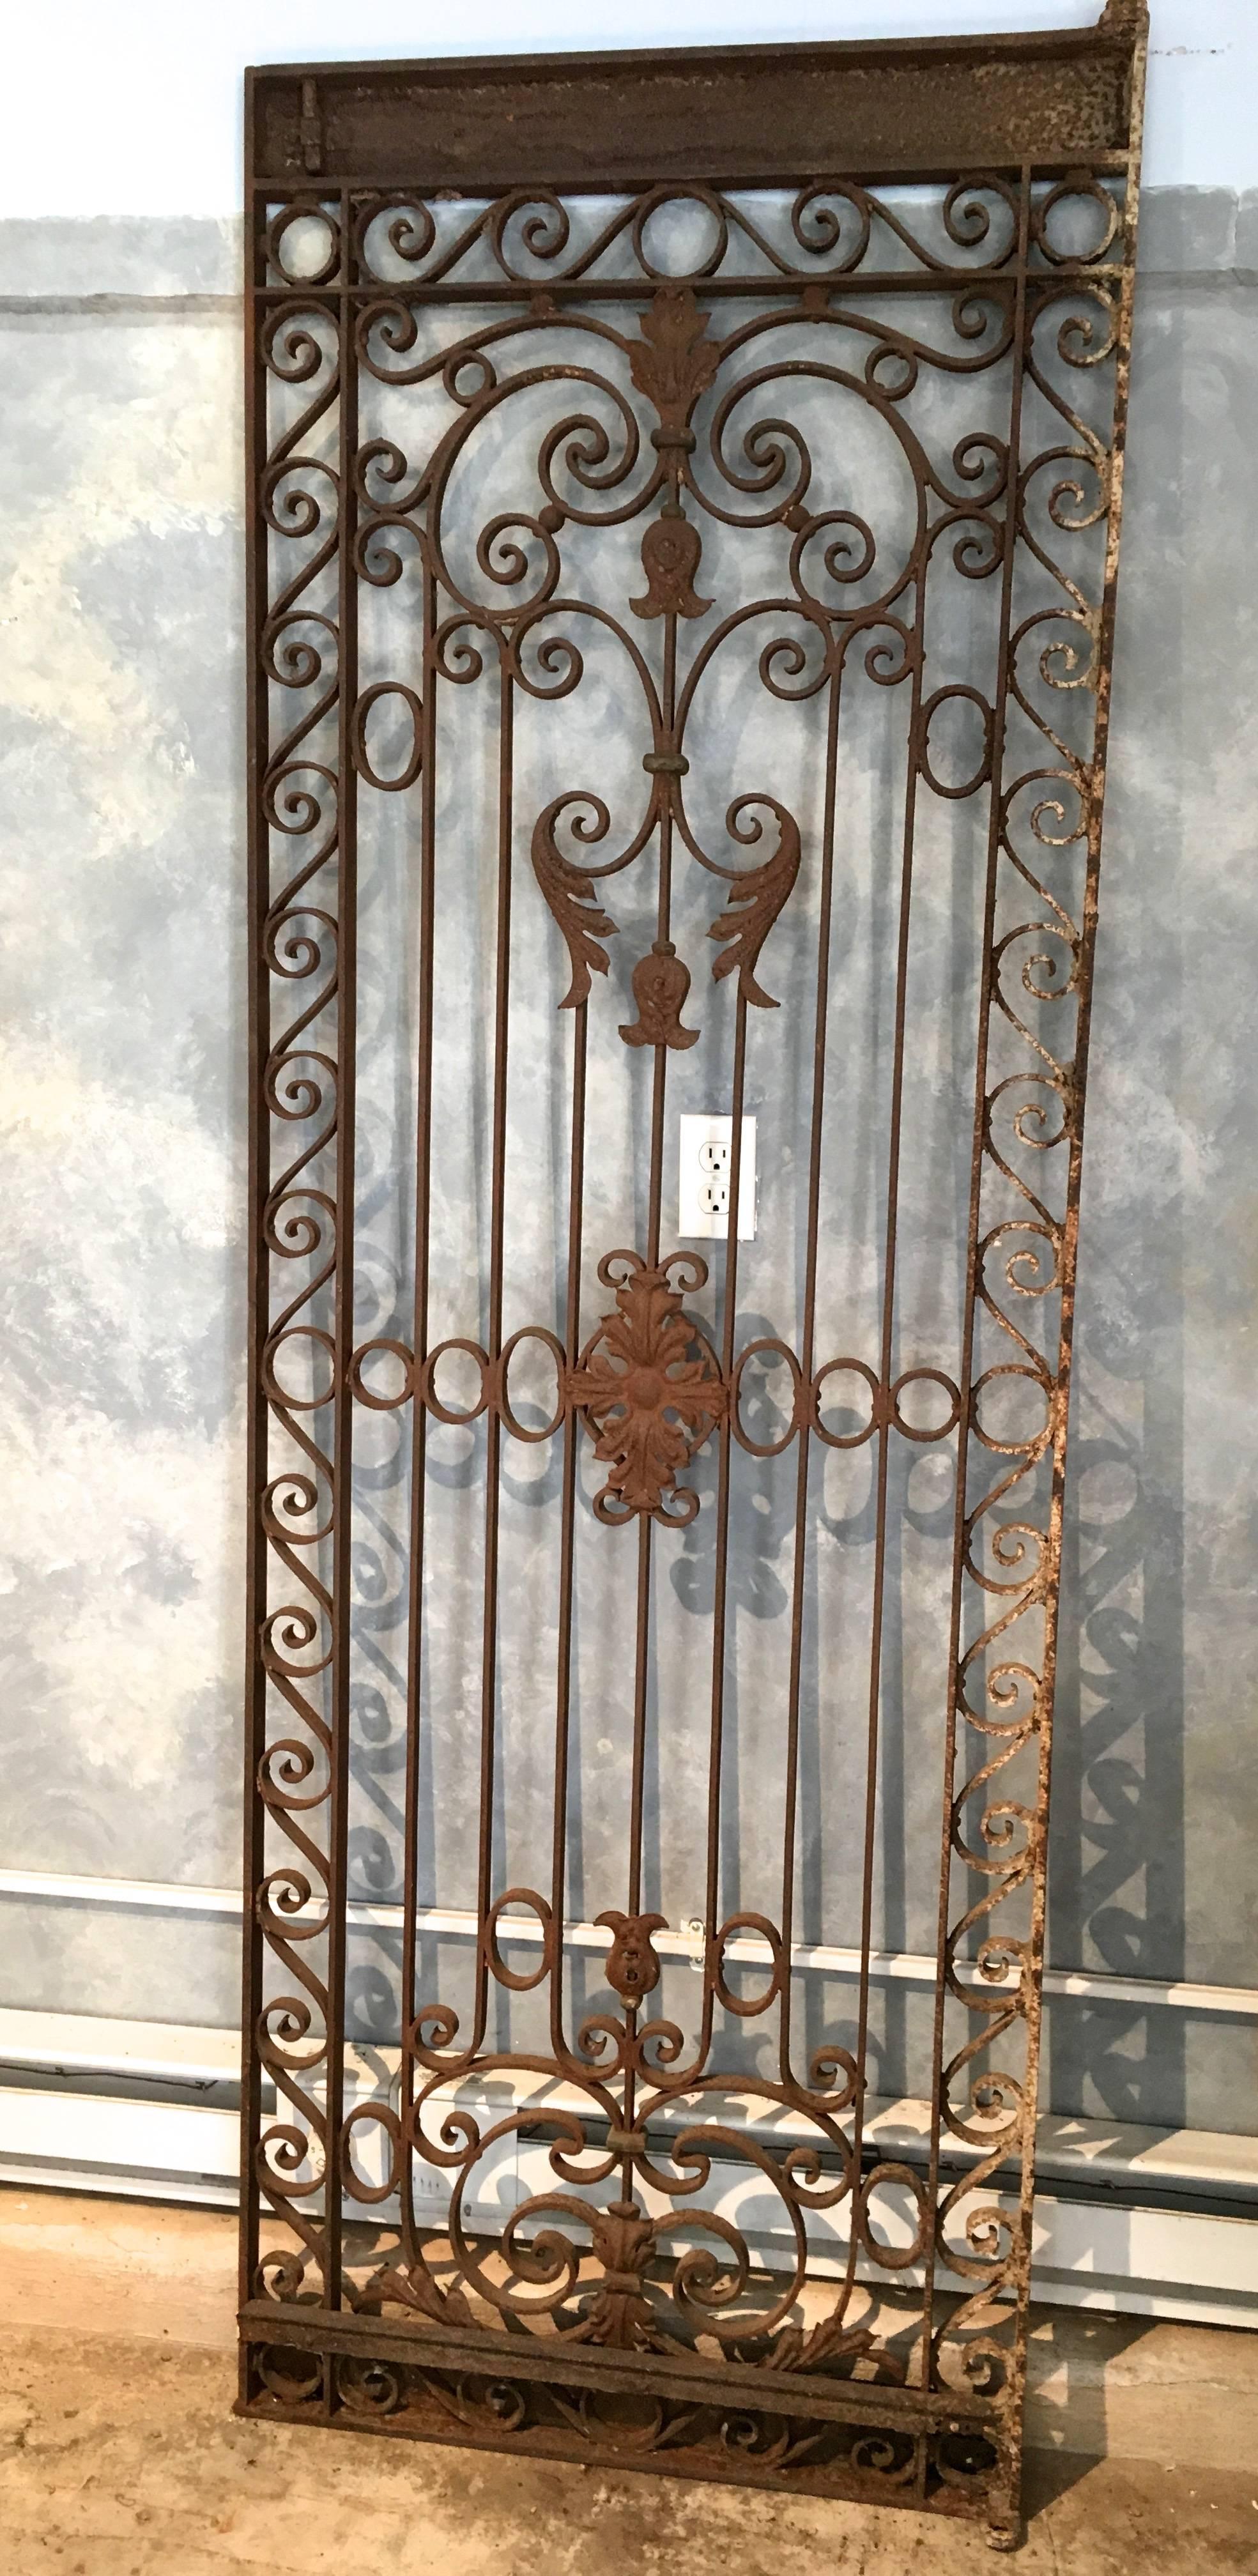 This stunning hand-wrought iron gate came from the Loire Valley and features a panoply of rococo curves, swirls and acanthus leaf decoration. In wonderful condition, the rusted surface is superficial and there are no worn-through parts, repairs, or